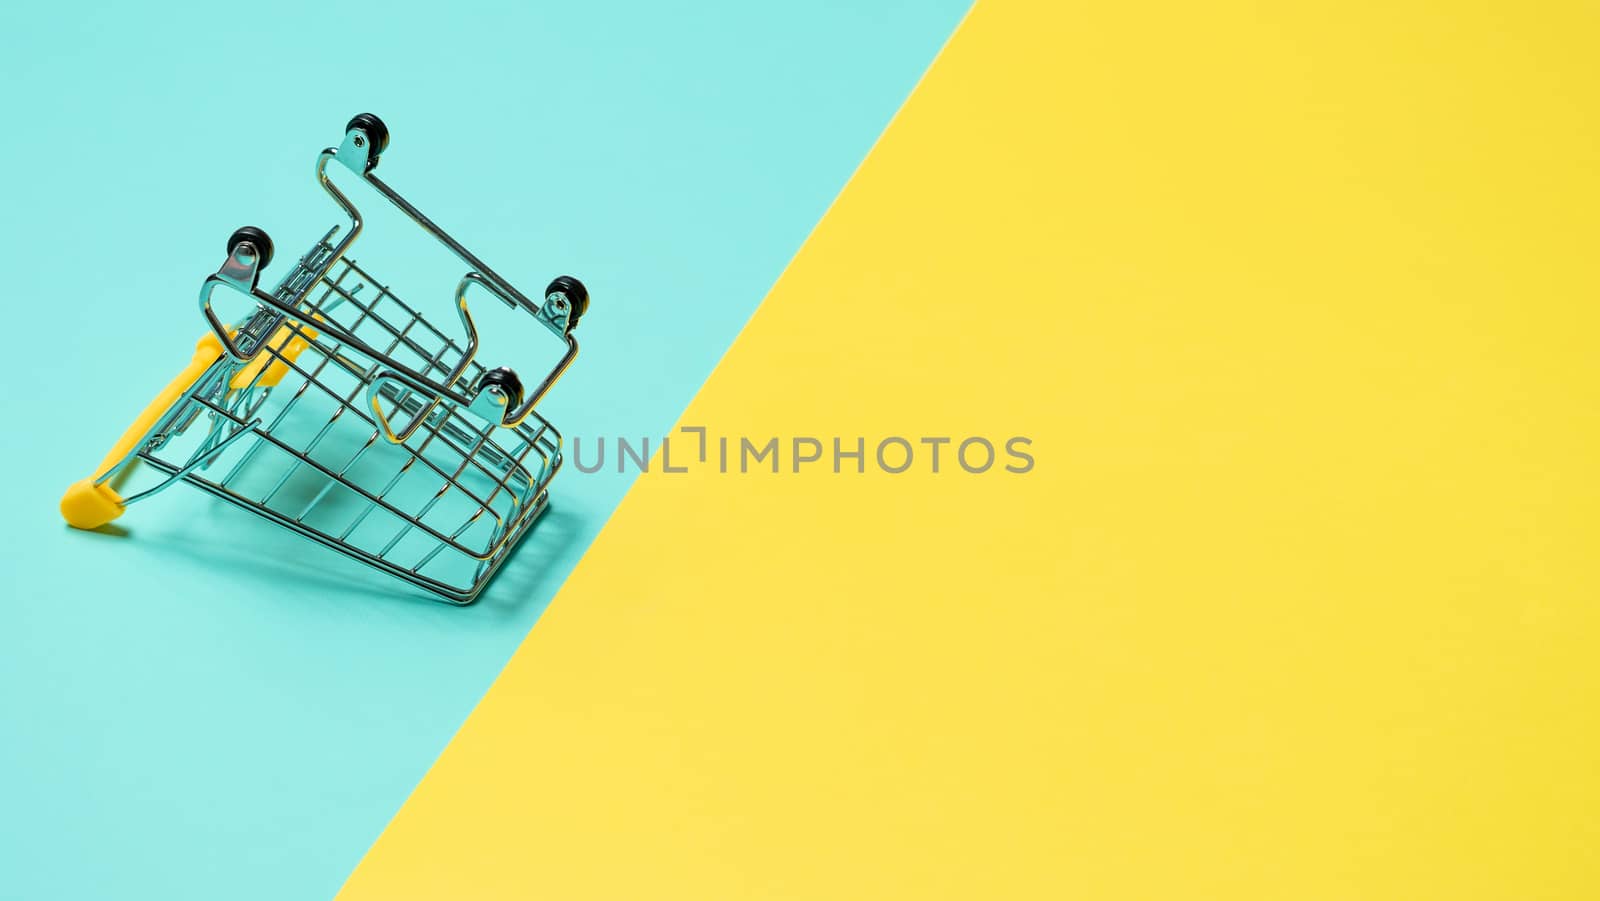 Empty inverted shopping cart on blue and yellow background. Inverted toy trolley on bright colorful background, copy space for text or design.